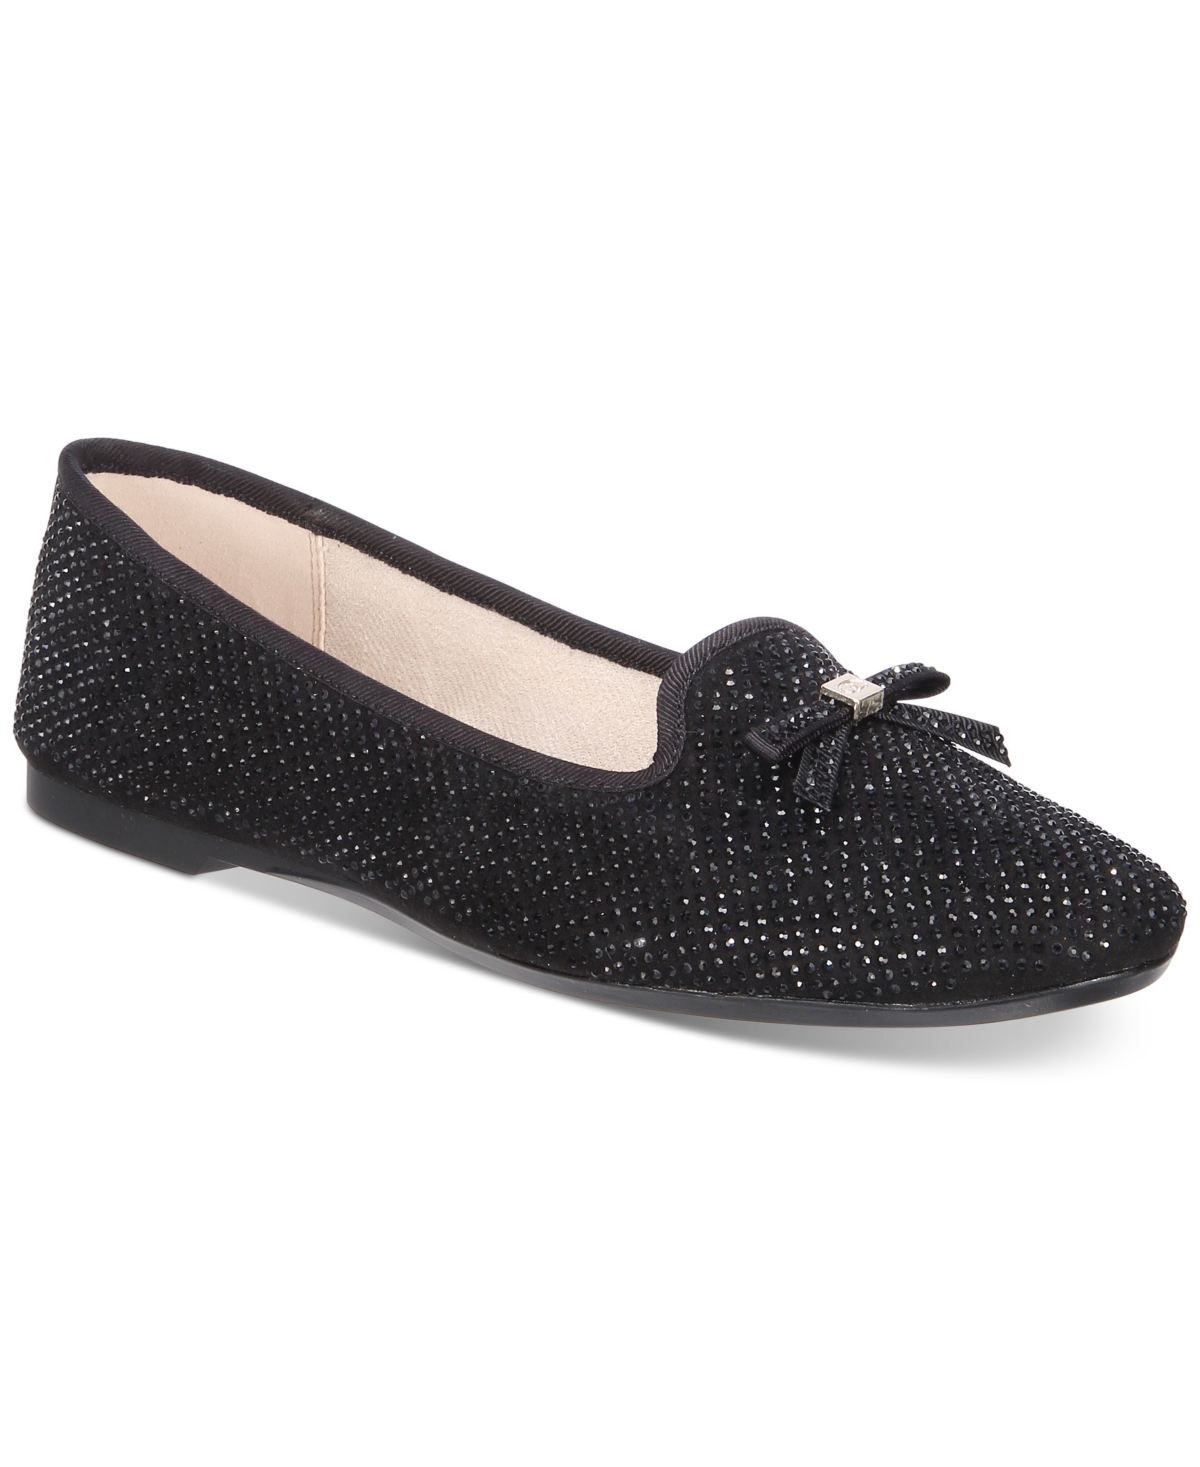 Kimii Evening Deconstructed Loafers, Created for Macy's - Black Bling